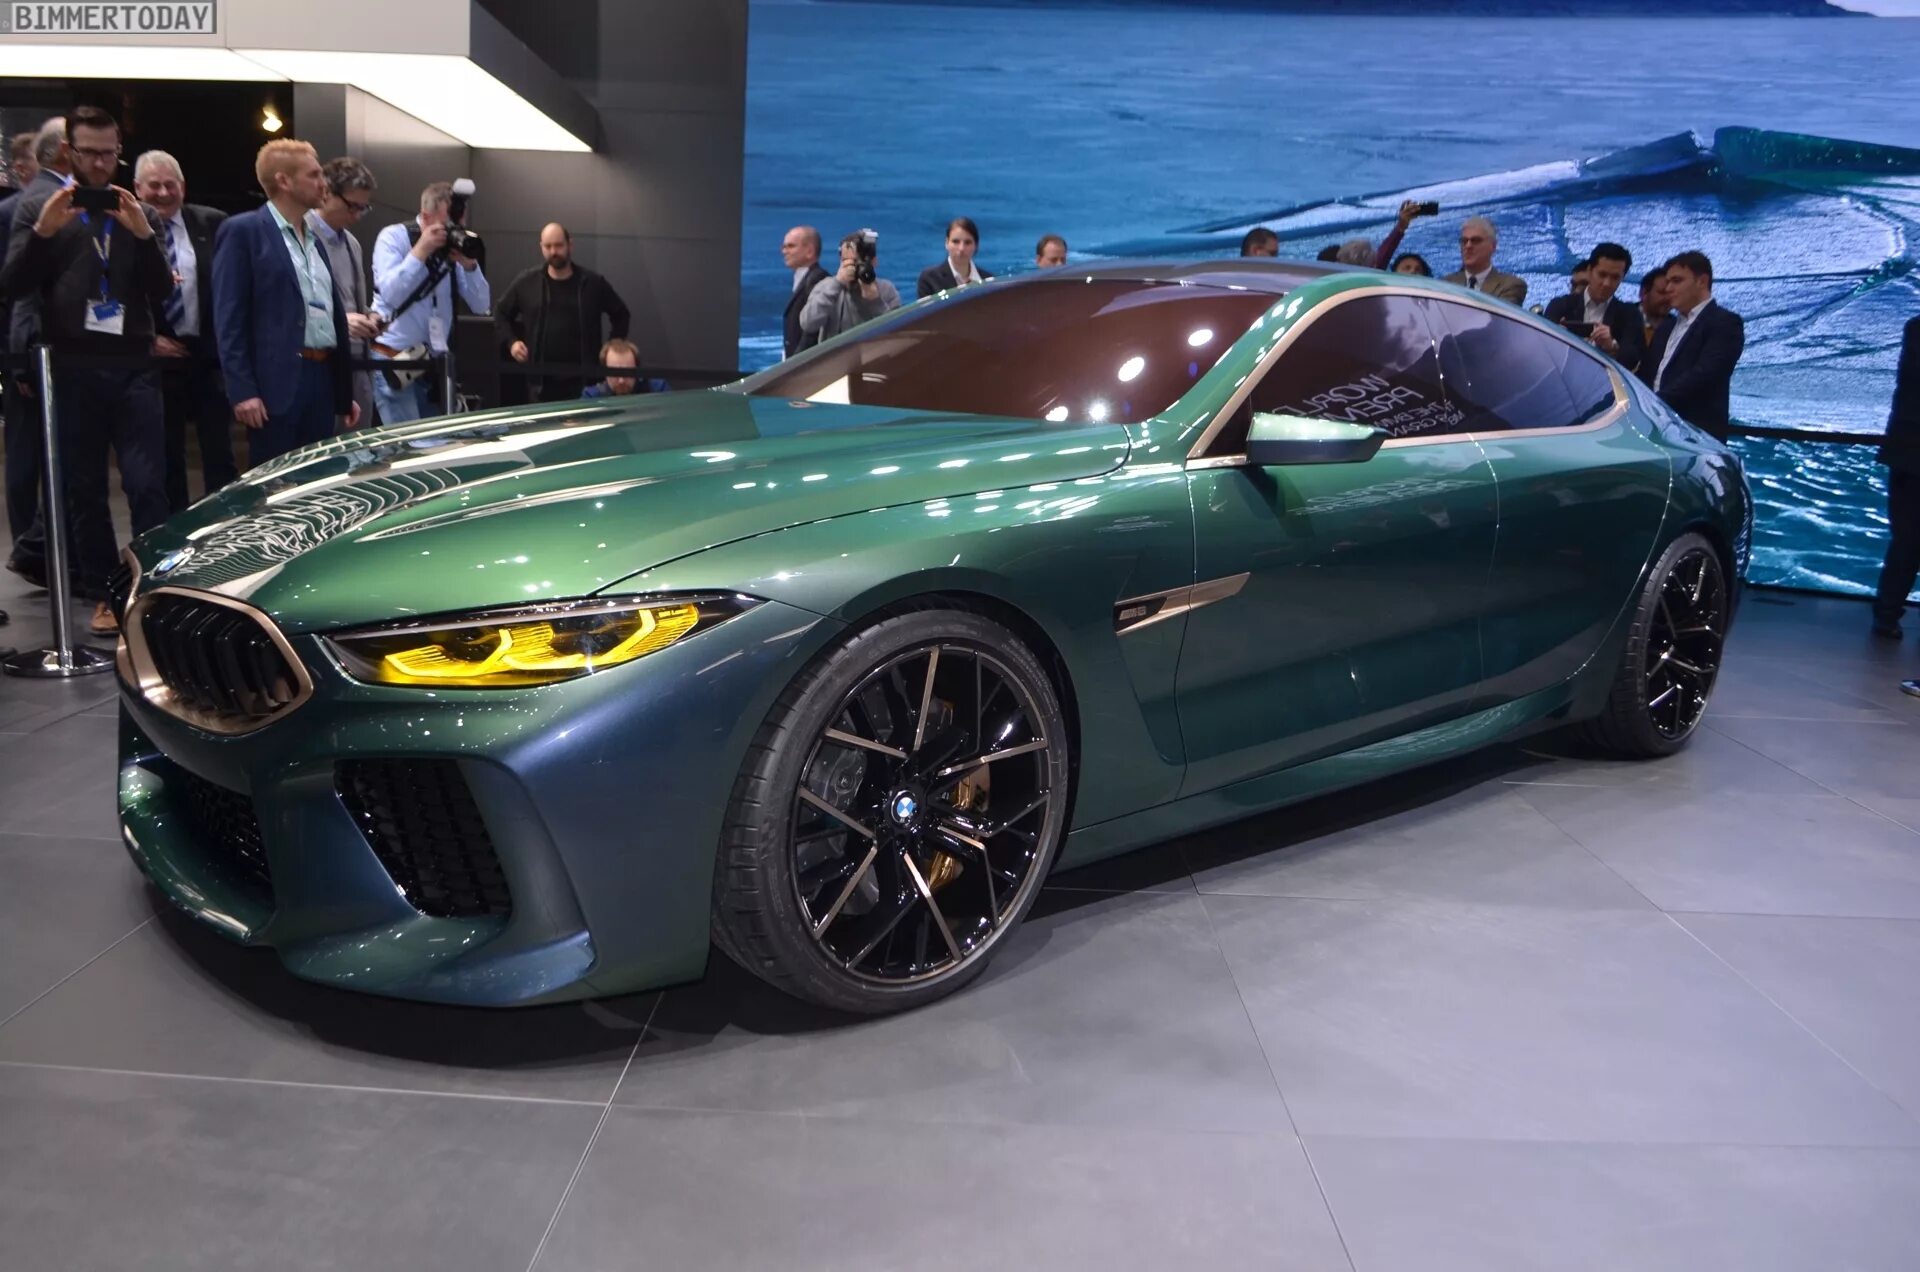 BMW m8 2018. BMW m8 Gran Coupe. BMW m8 Gran Coupe 2018. BMW m8 Gran Coupe матовый.